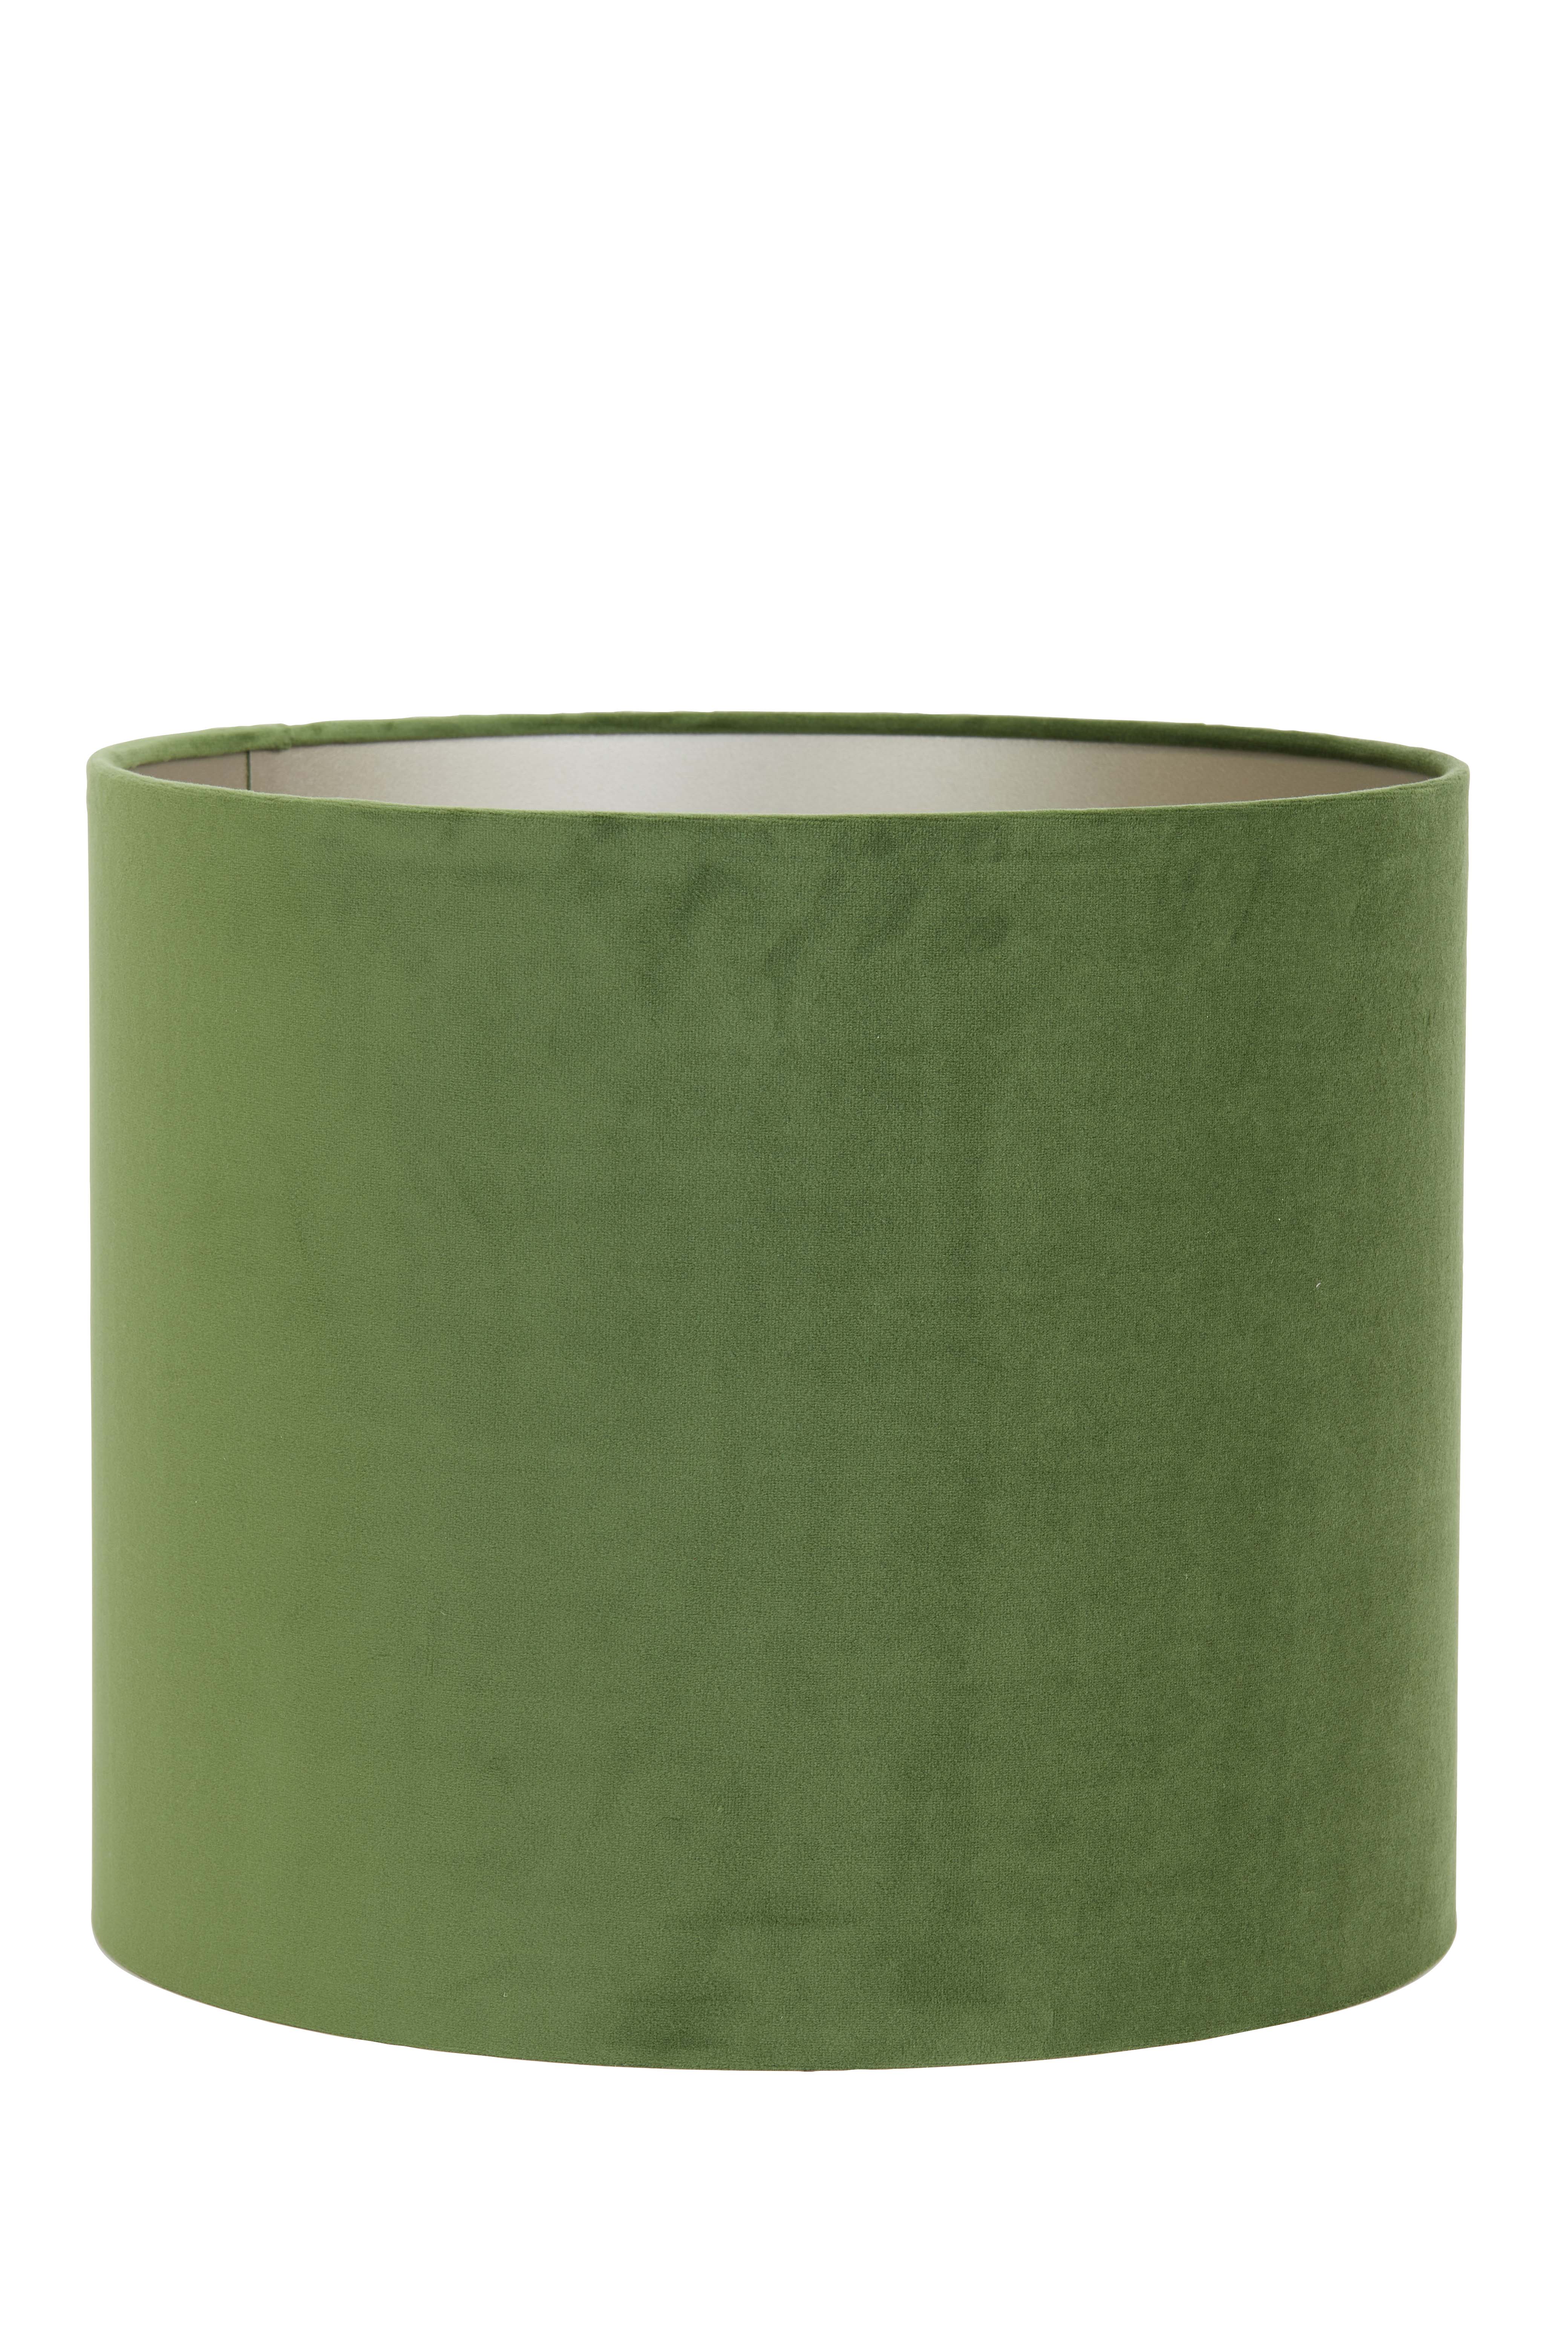 Shade cylinder 35-35-30 cm VELOURS dusty green